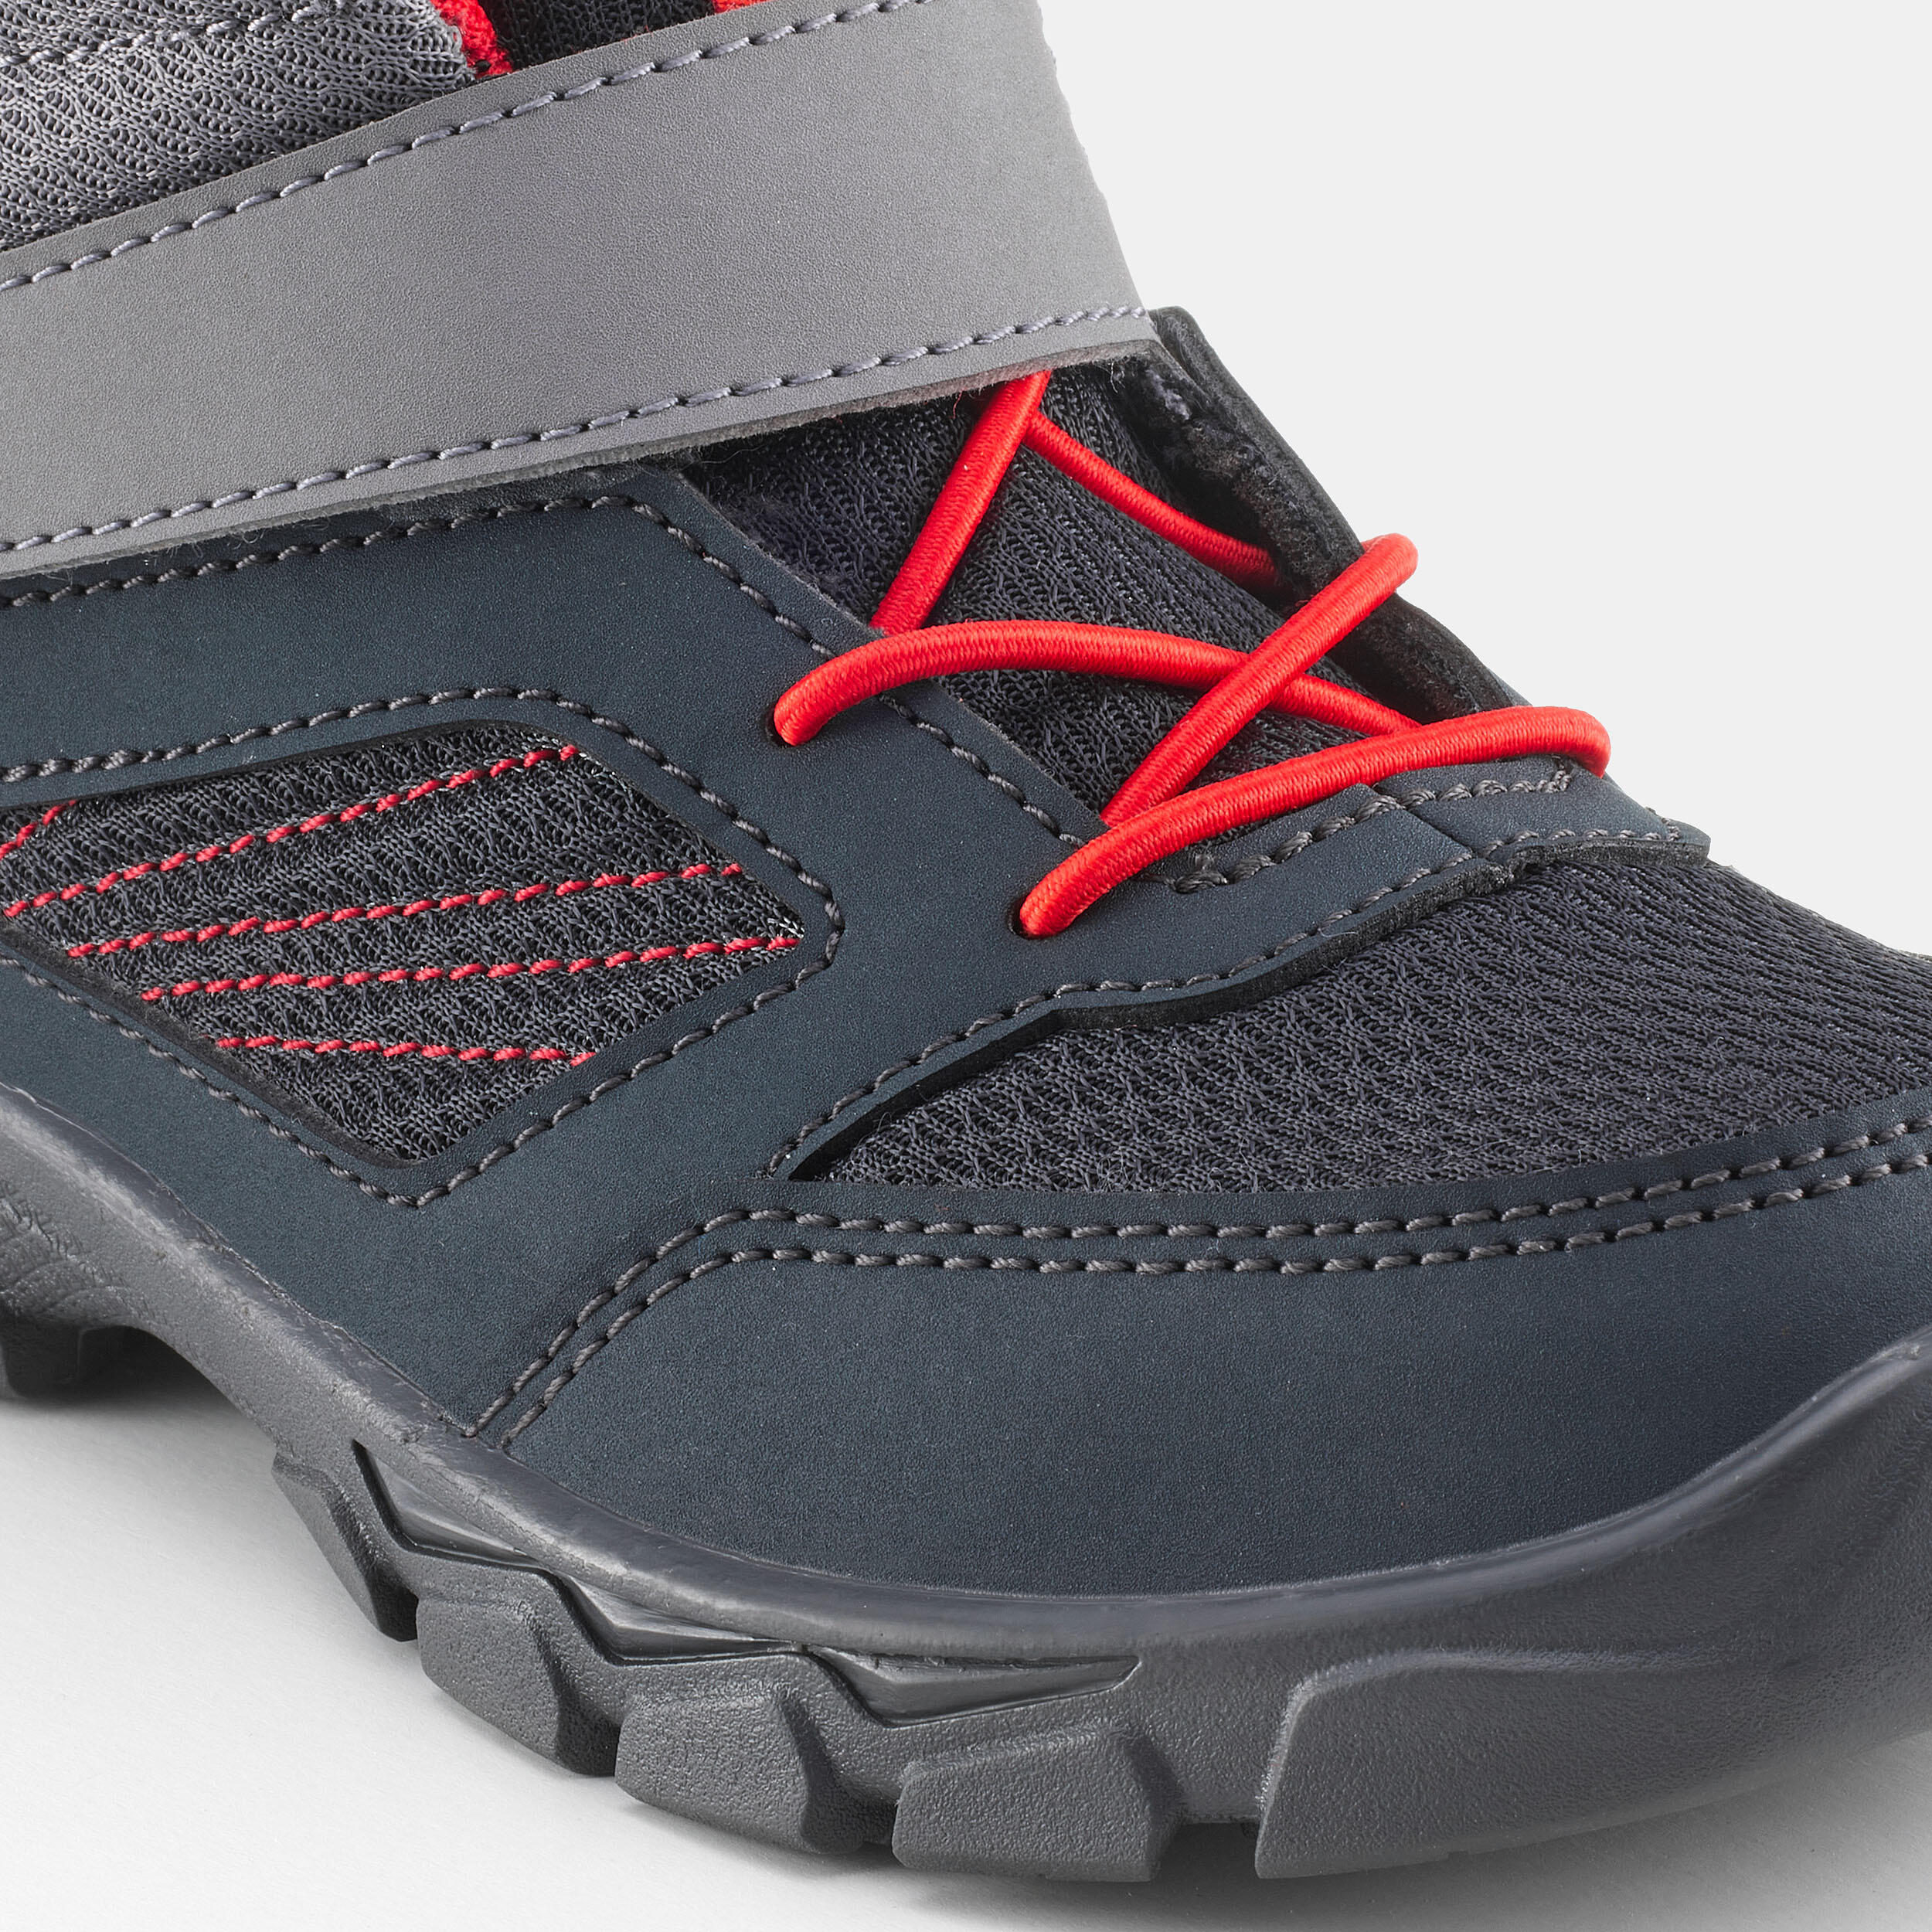 Kids' Hiking Boots - MH 100 Grey/Red - QUECHUA